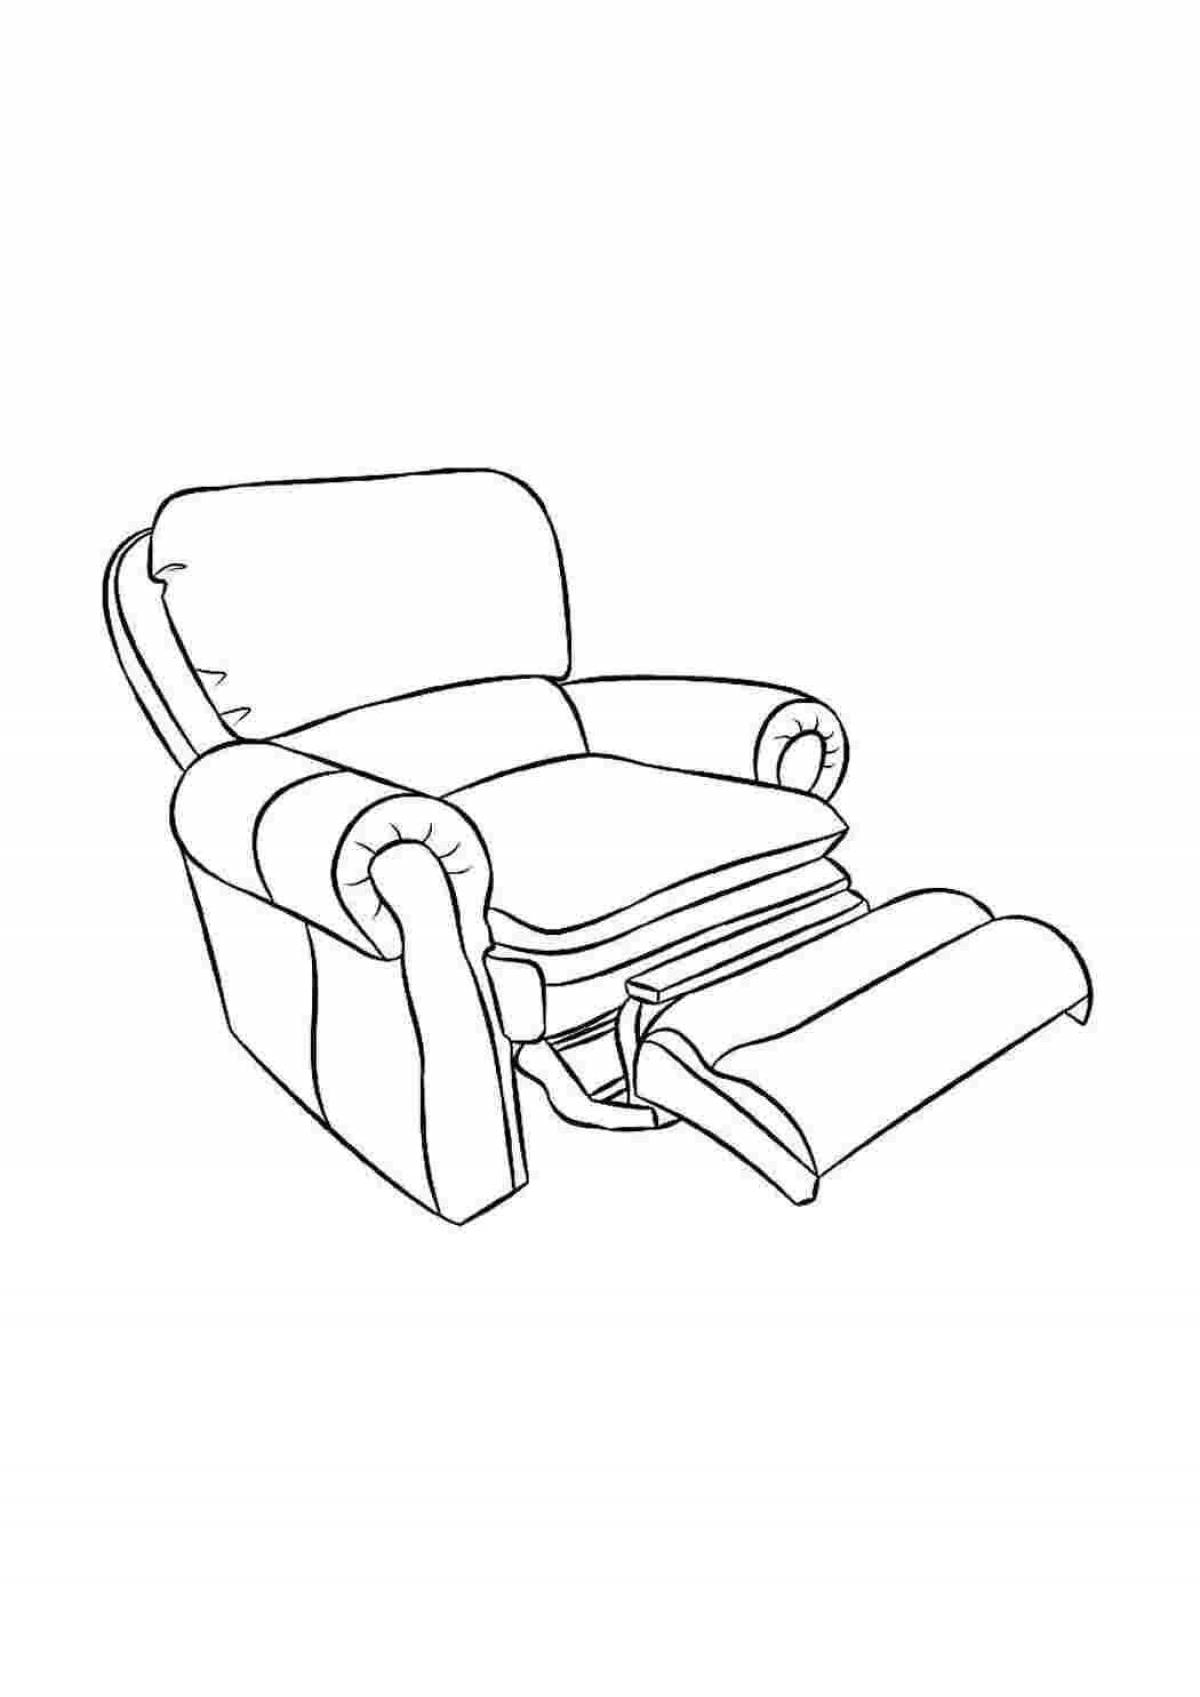 Coloring book gorgeous armchair for children 4-5 years old